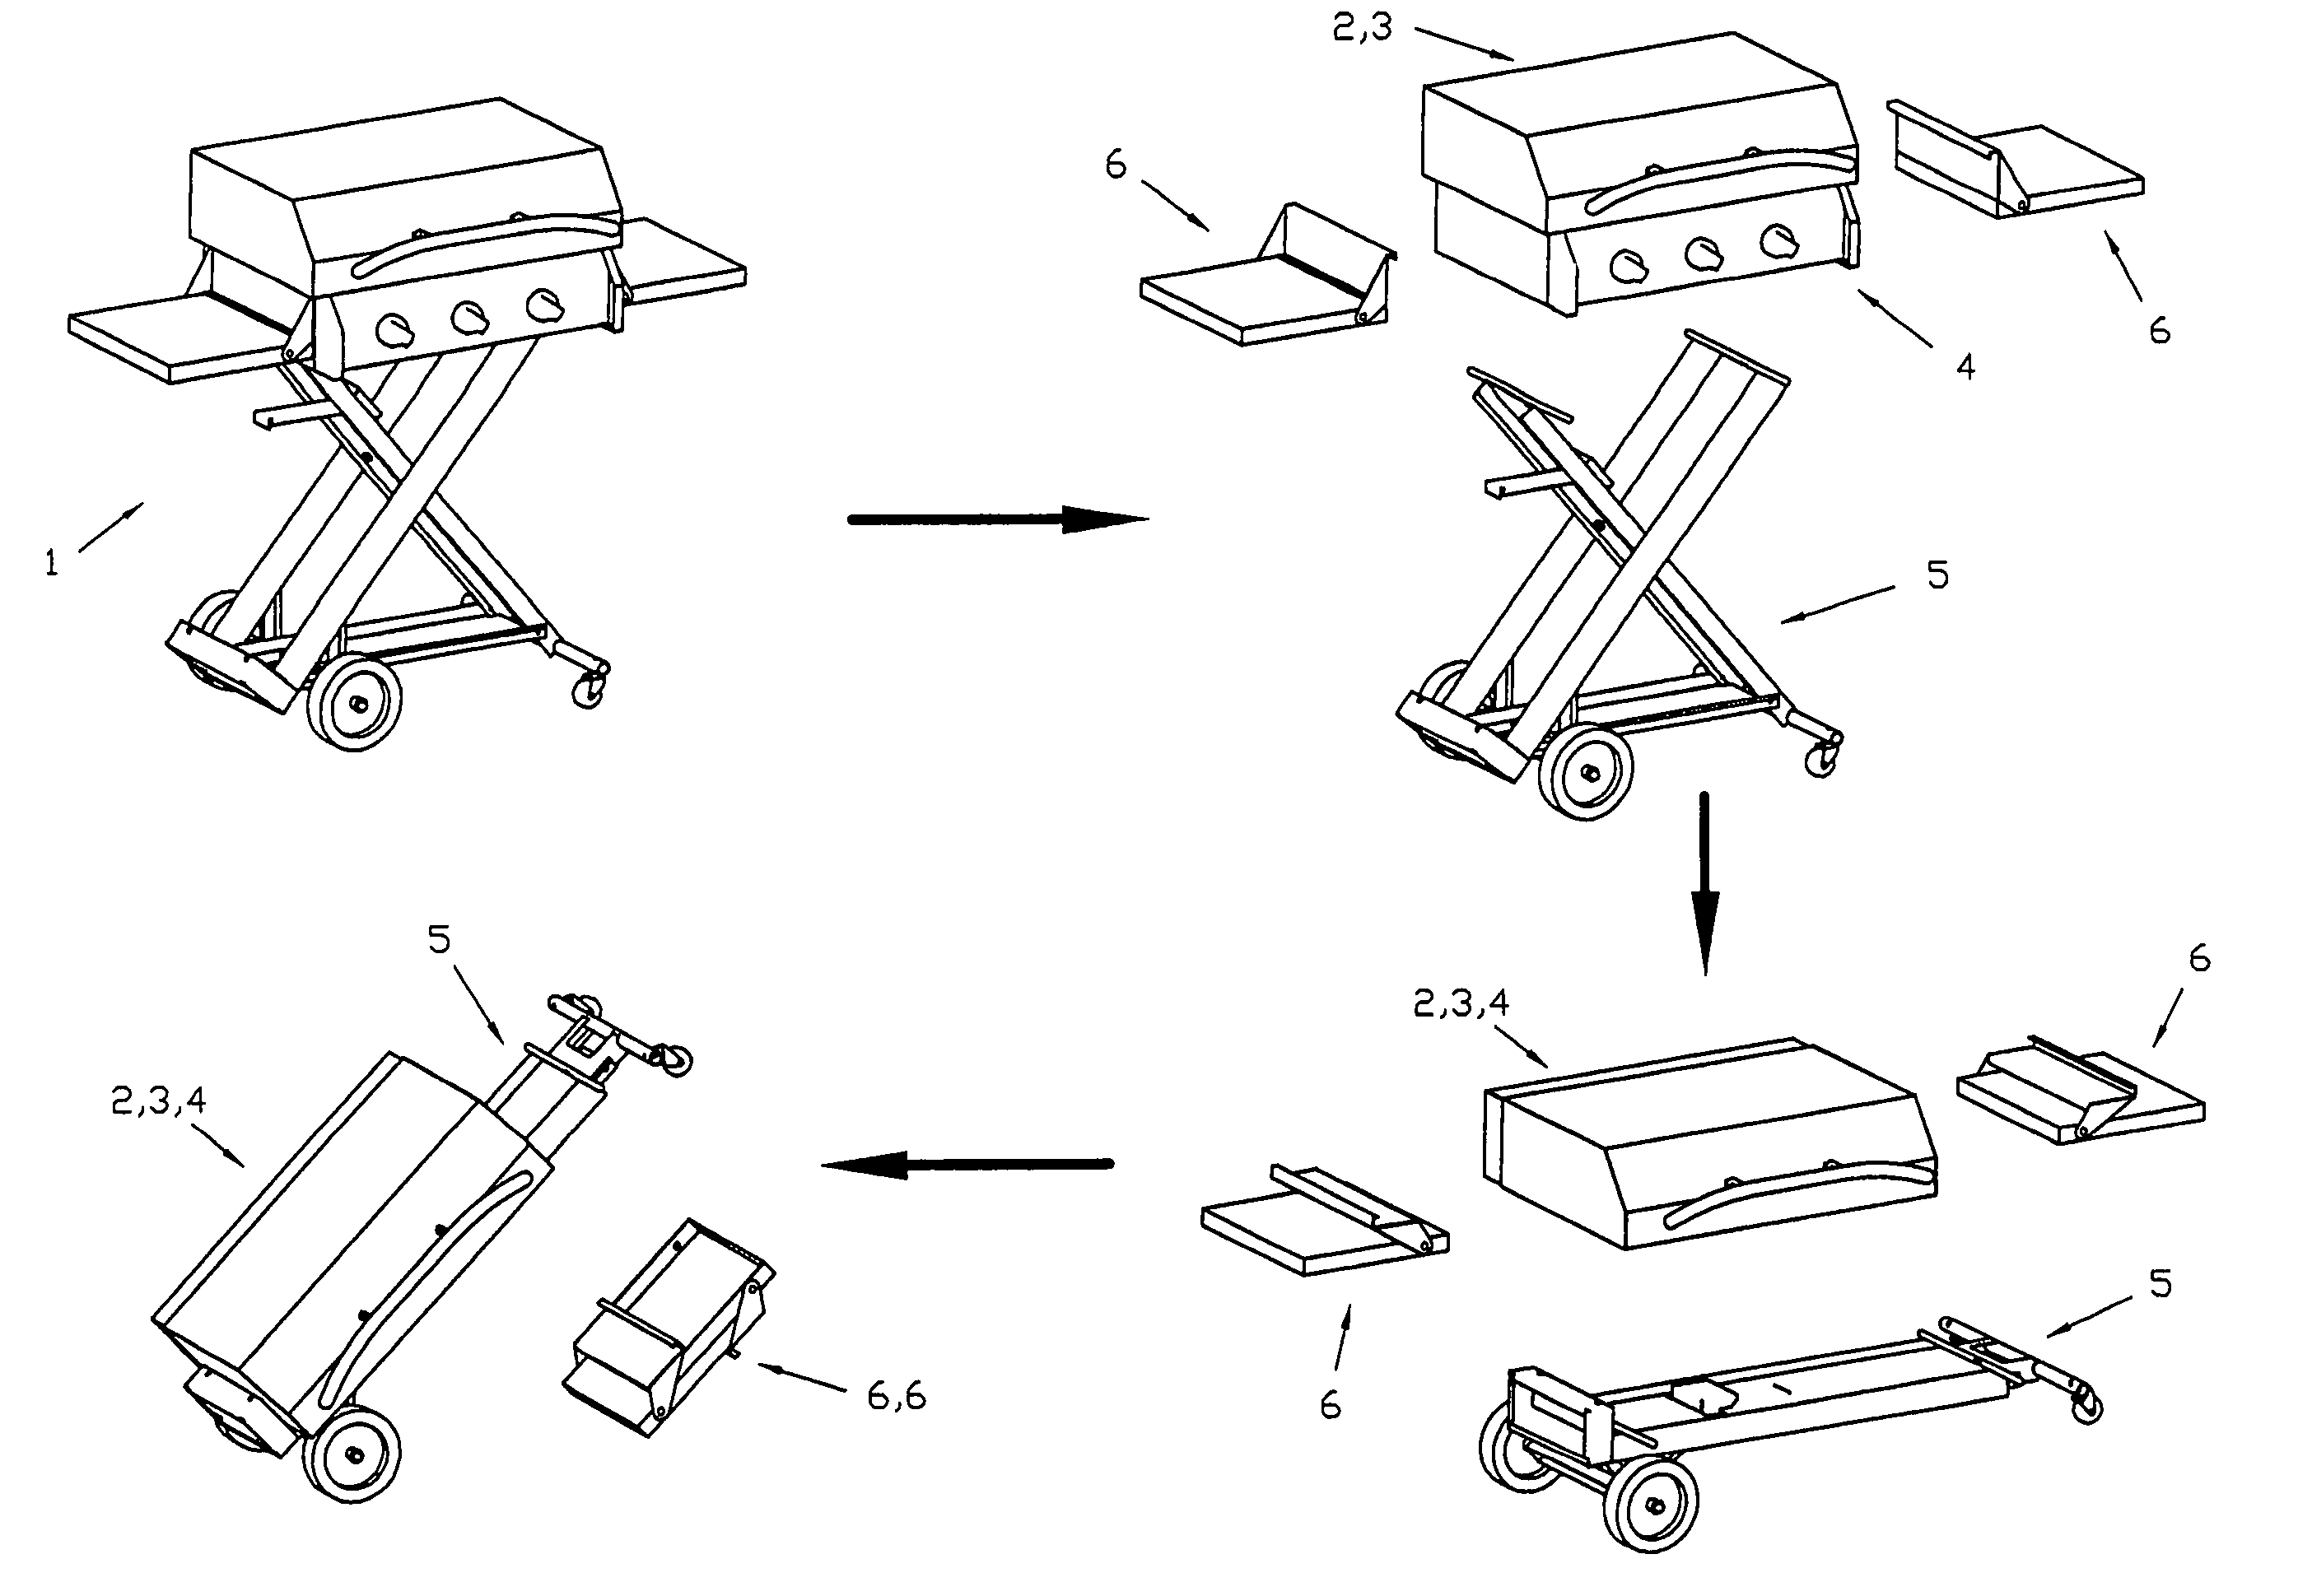 Collapsible barbeque system